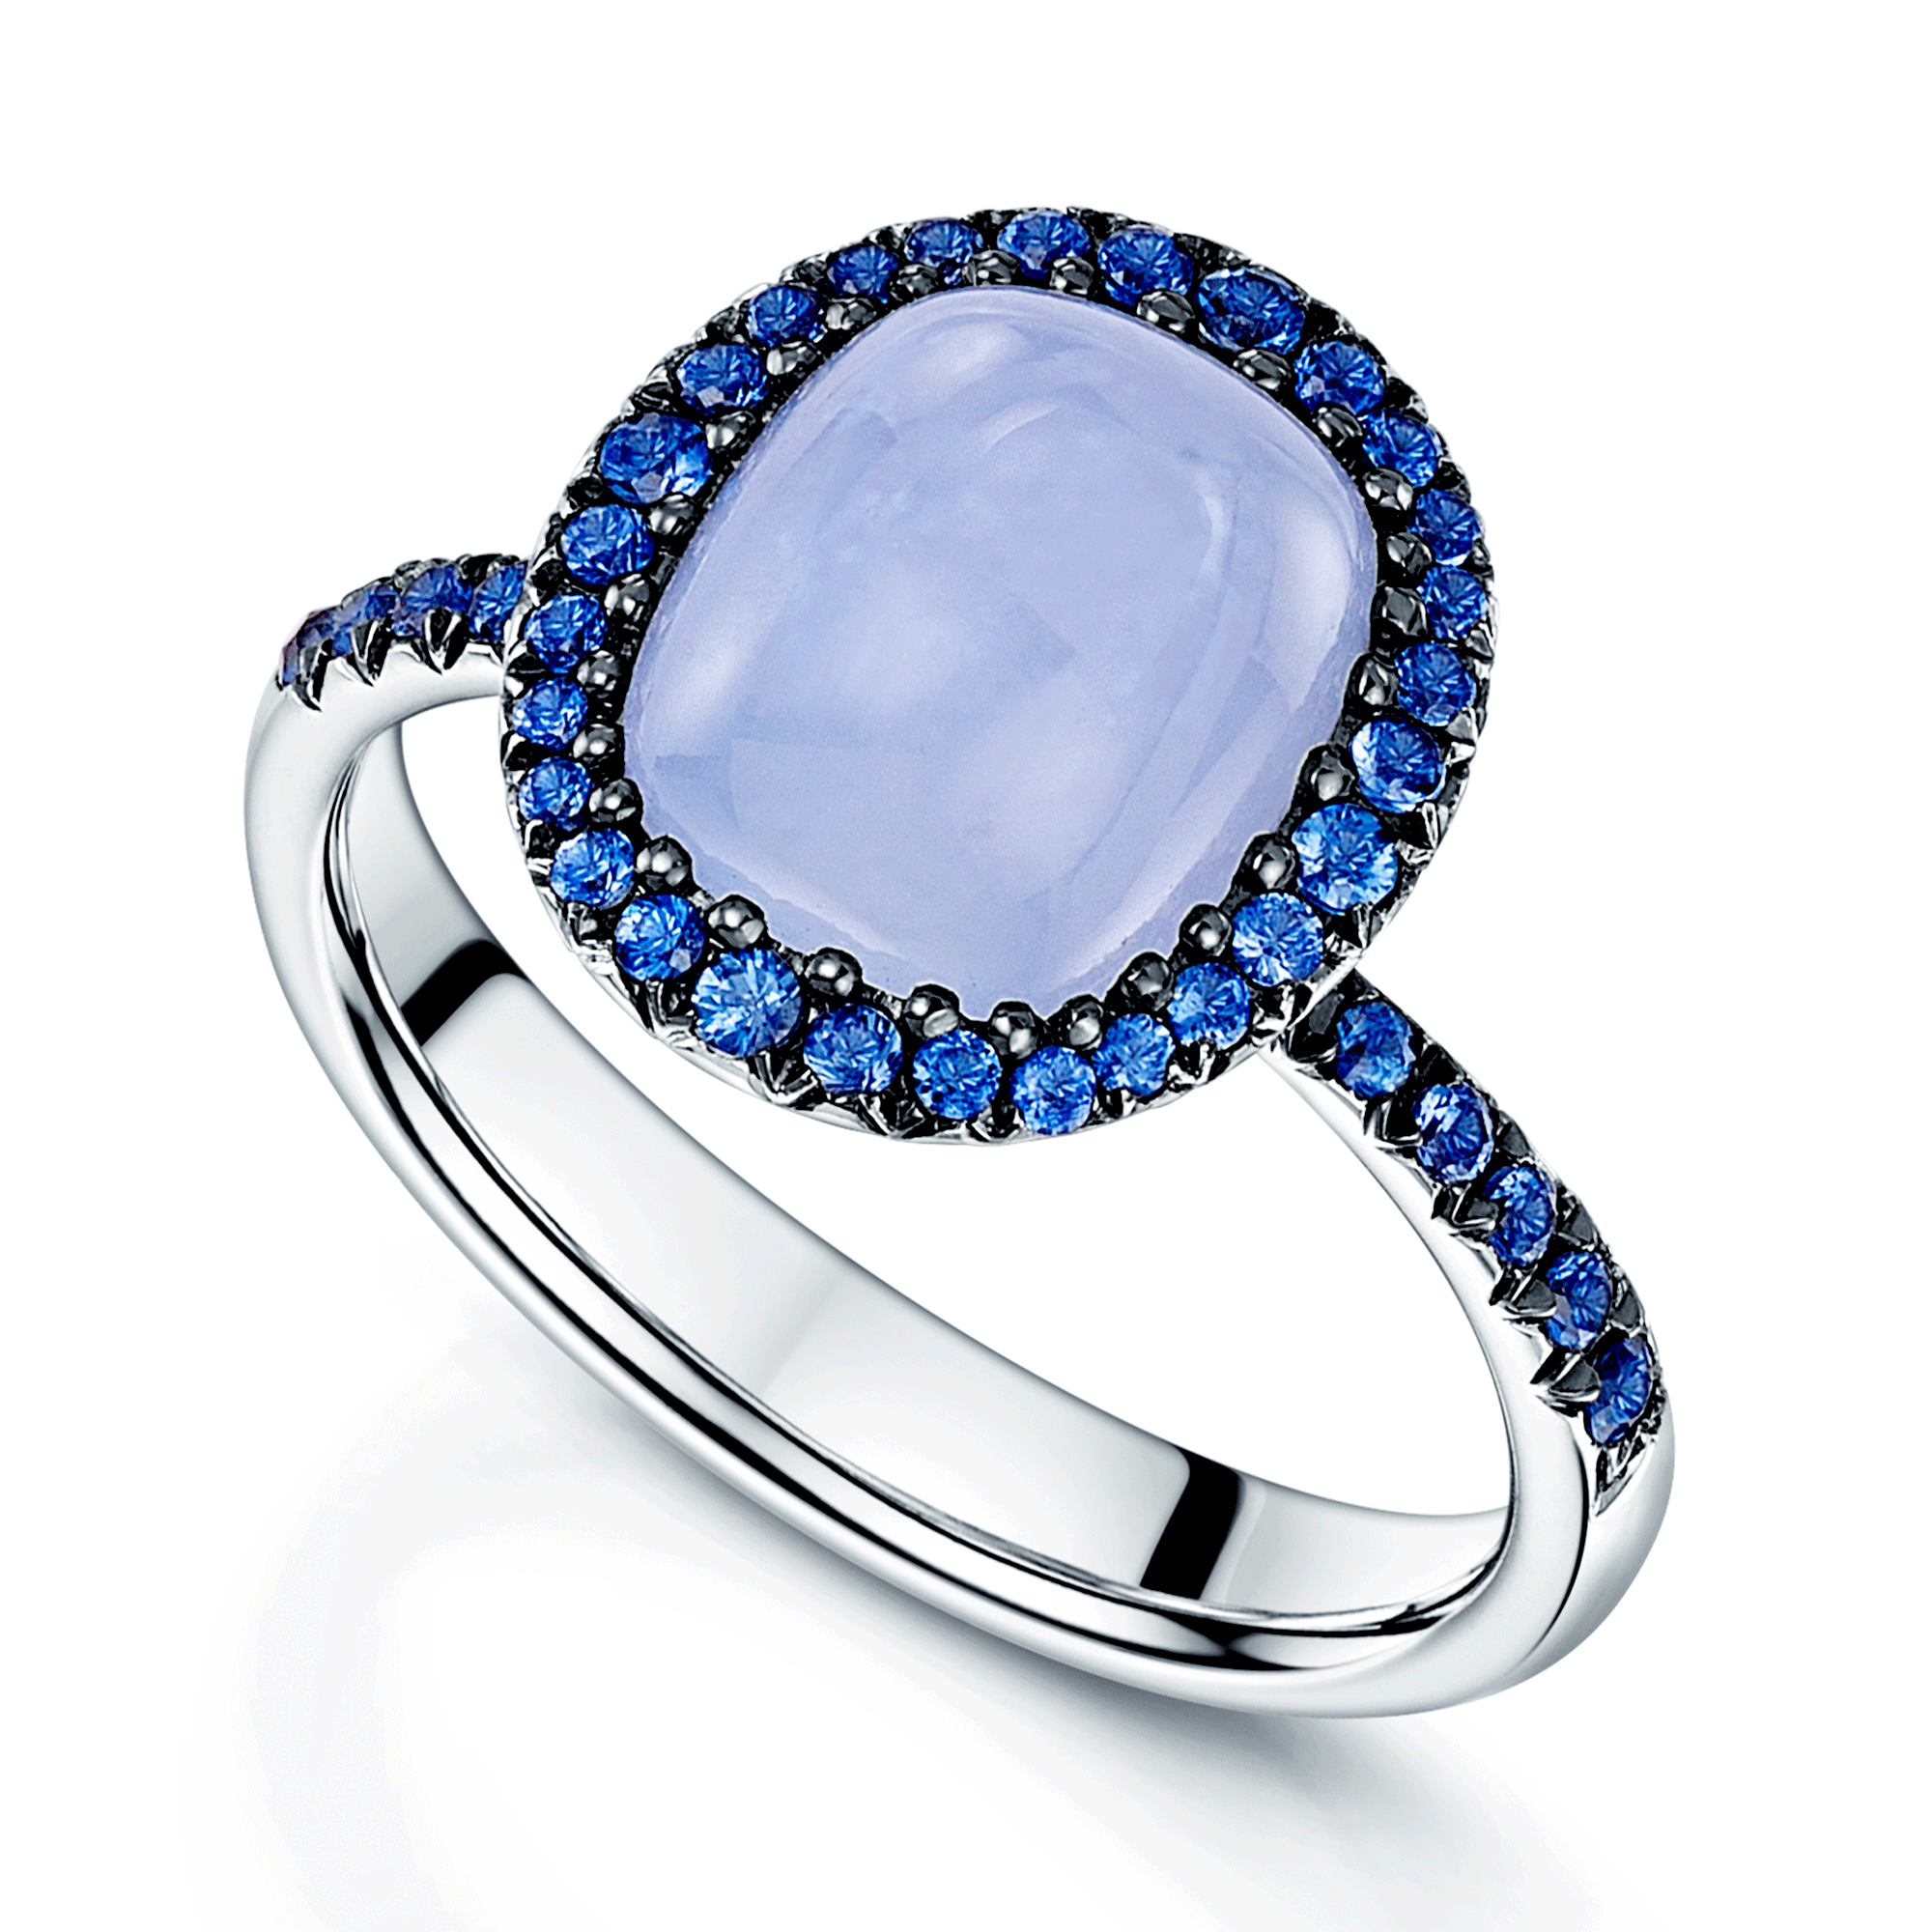 18ct White Gold Cushion Cut Chalcedony Halo Dress Ring With Diamond Shoulders